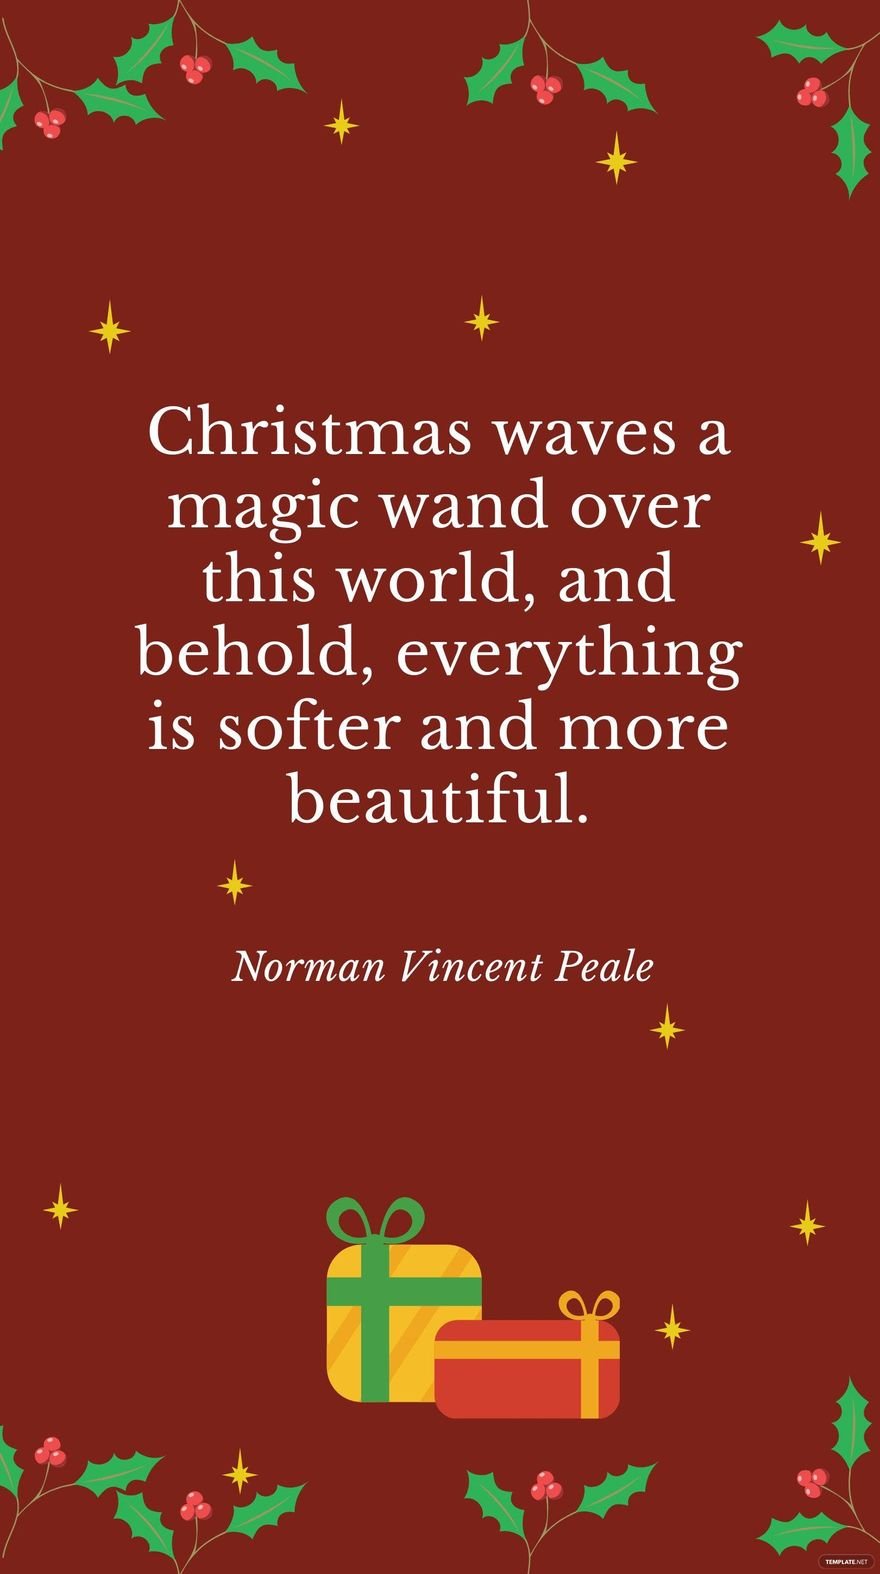 Norman Vincent Peale - Christmas waves a magic wand over this world, and behold, everything is softer and more beautiful.